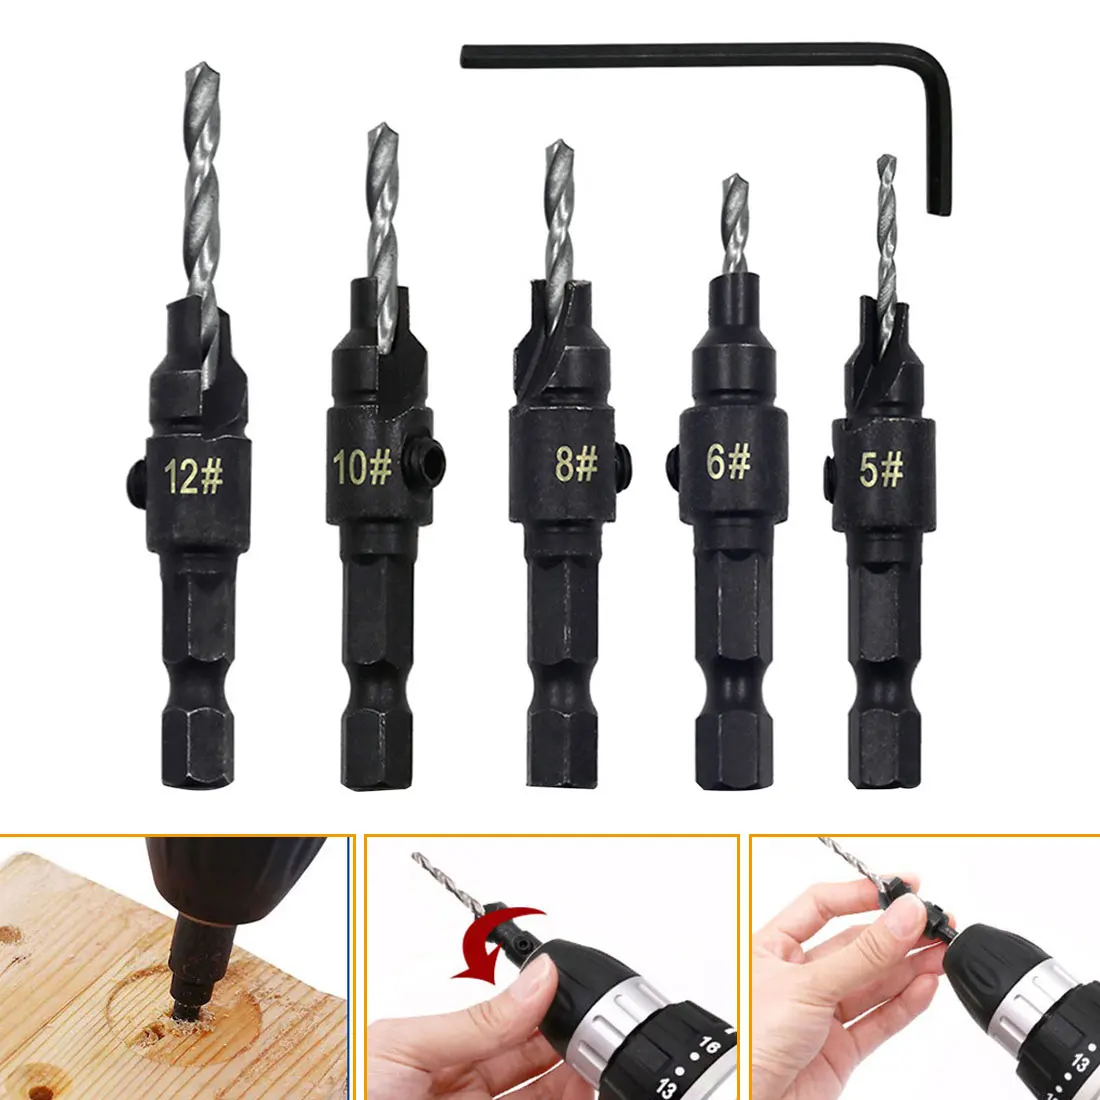 

5pcs Hexagonal Countersink Drill Woodworking Drill Bit Set Drilling Pilot Holes For Screw Sizes #5 #6 #8 #10 #12 With a wrench